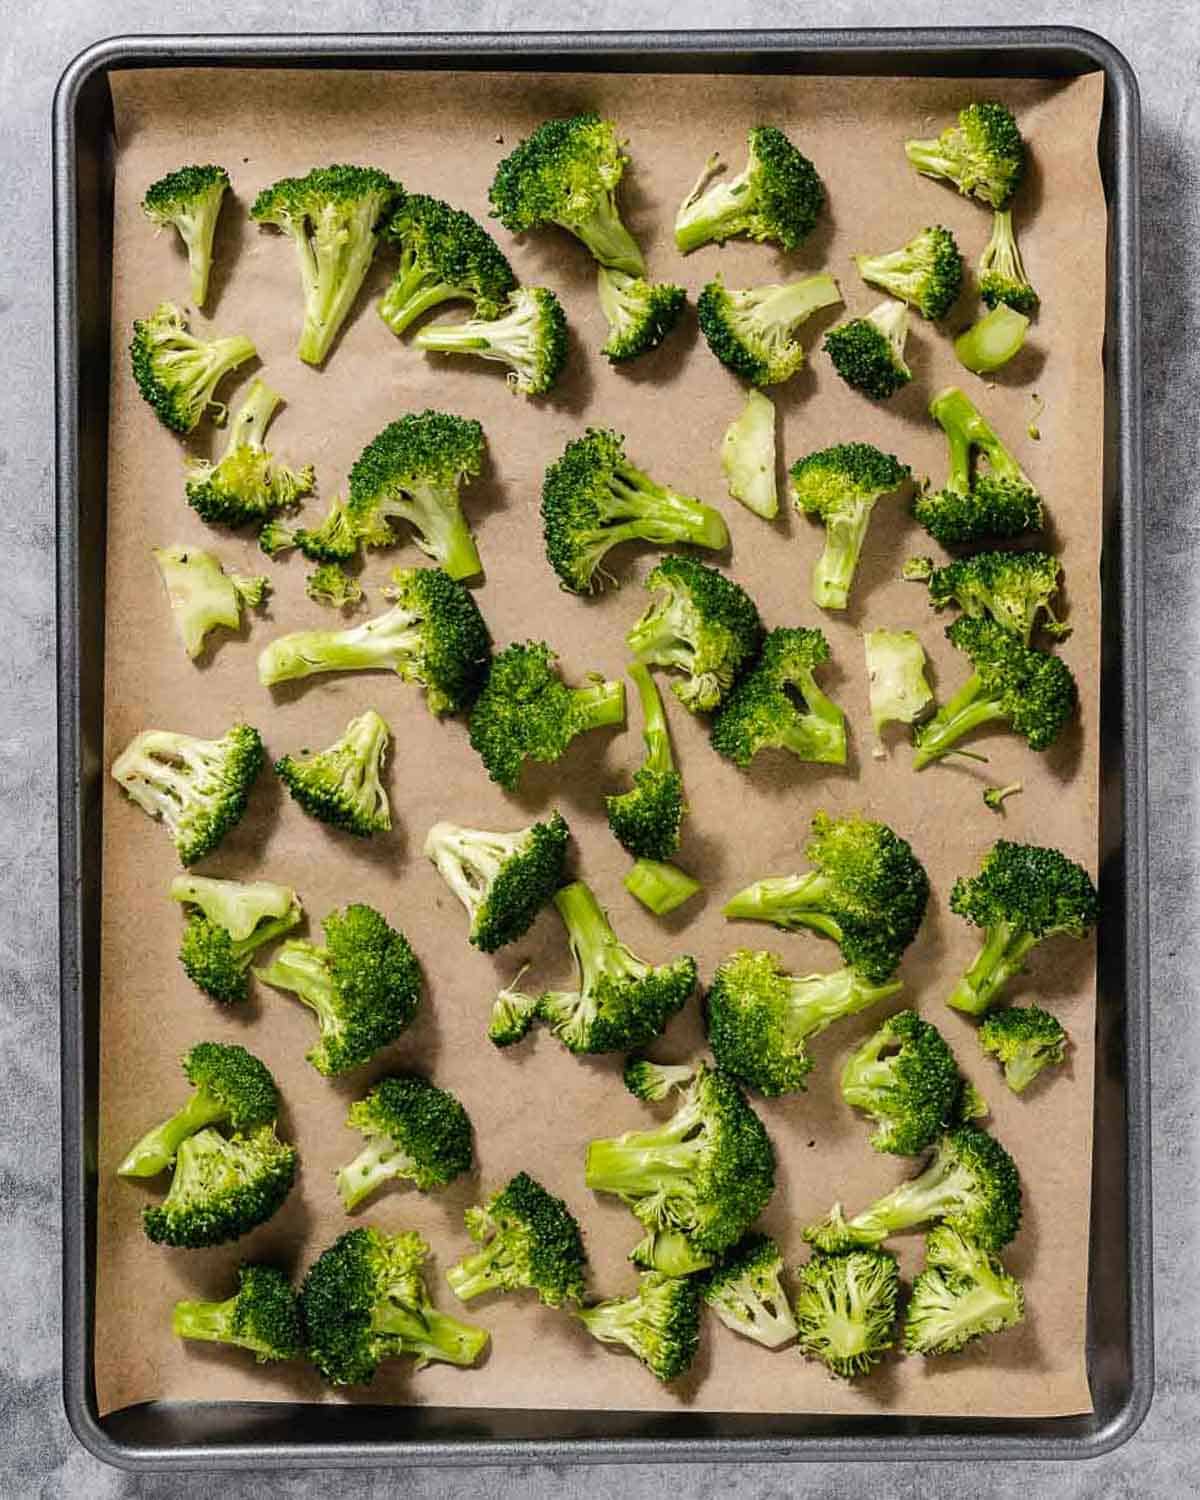 roasting broccoli in the oven